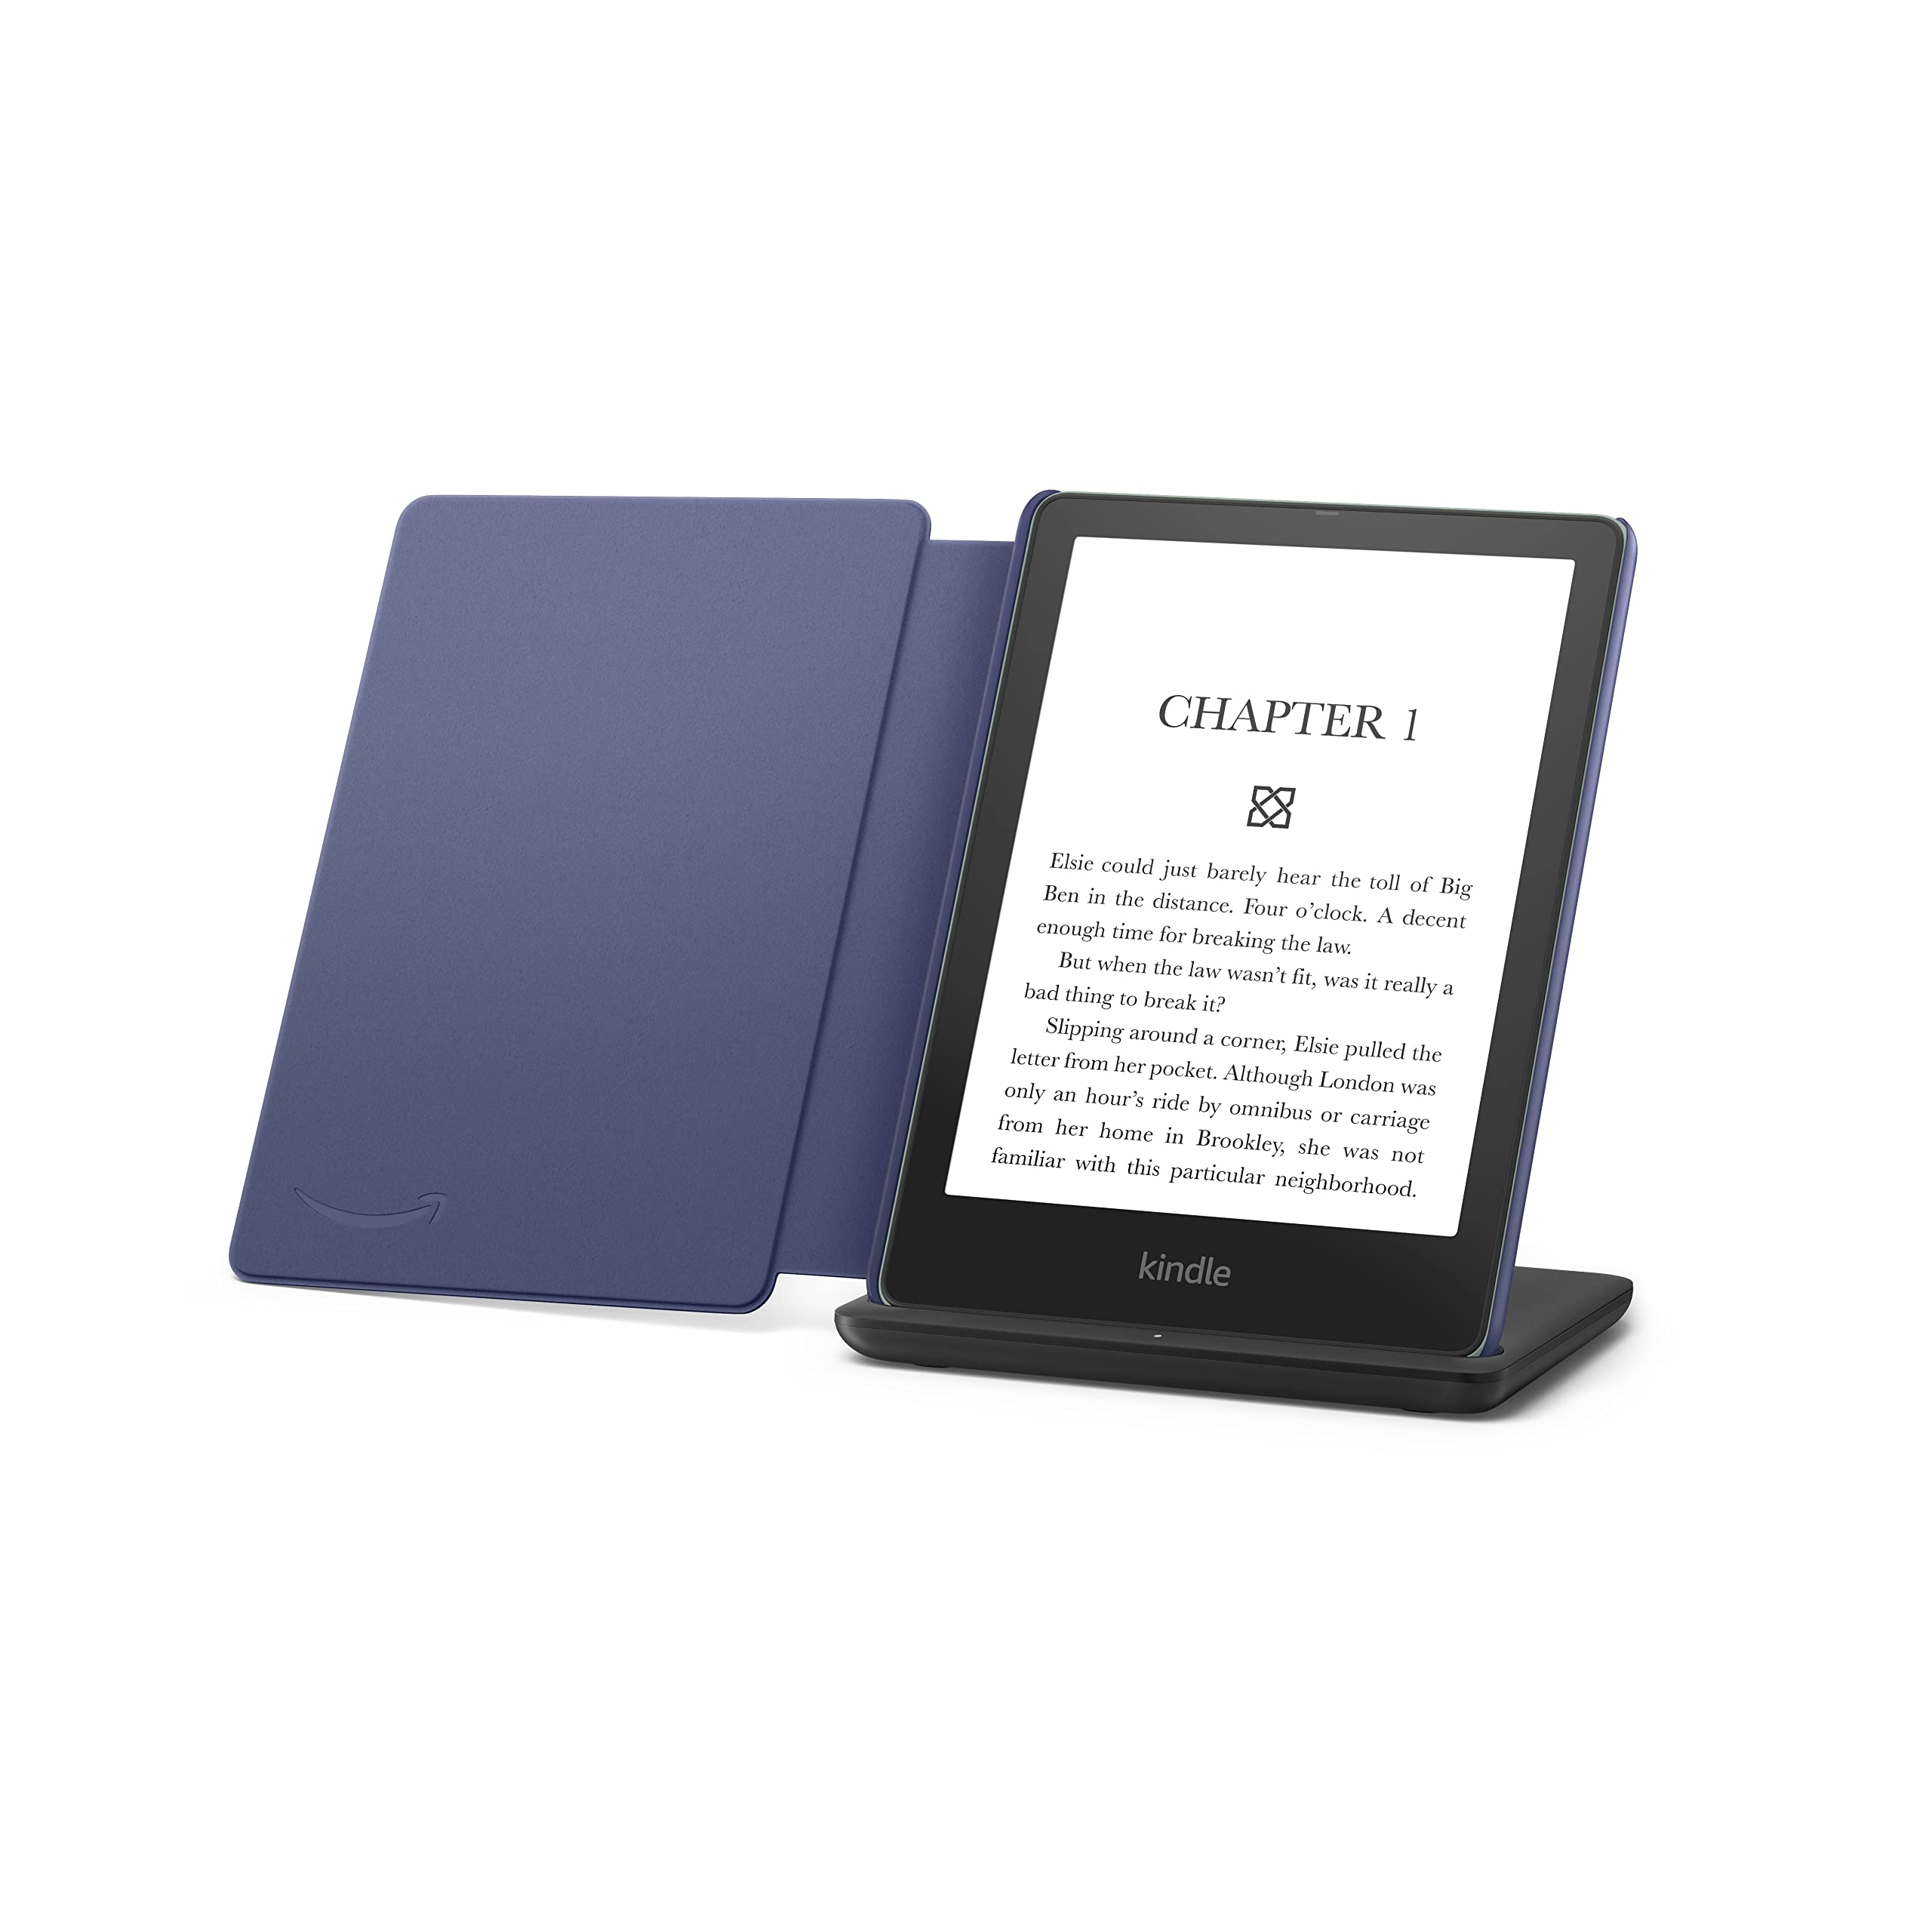 Kindle Paperwhite Signature Edition including Kindle Paperwhite (32 GB) - Agave Green - Without Lockscreen Ads, Leather Cover - Denim, and Wireless Charging Dock